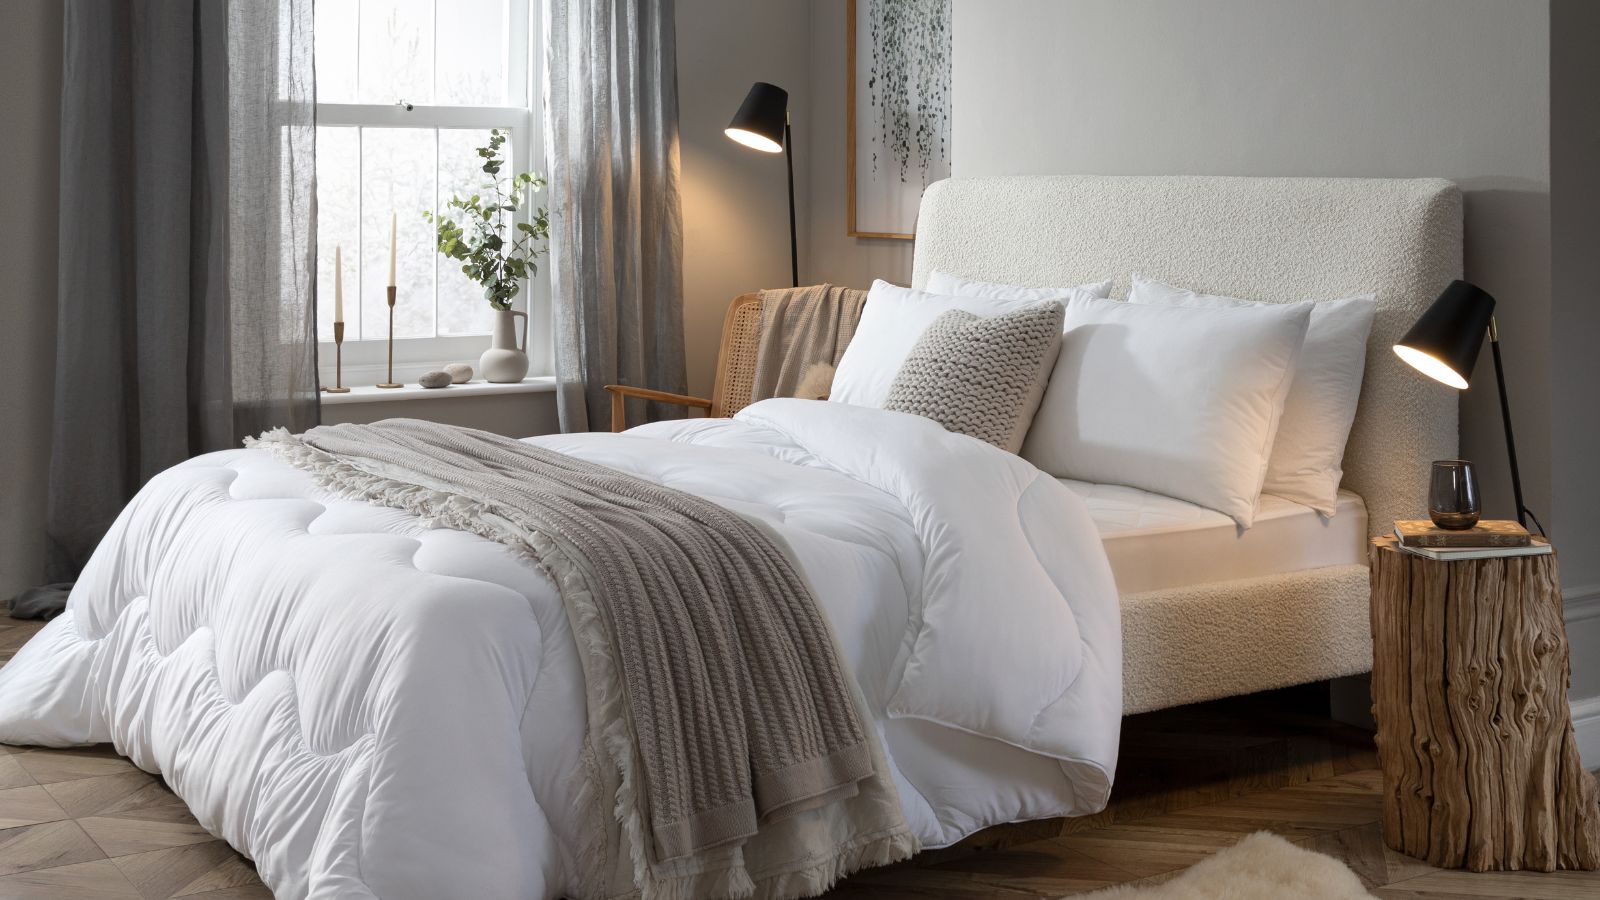 Bedding: Laundry expert's hack to kill germs and bacteria without